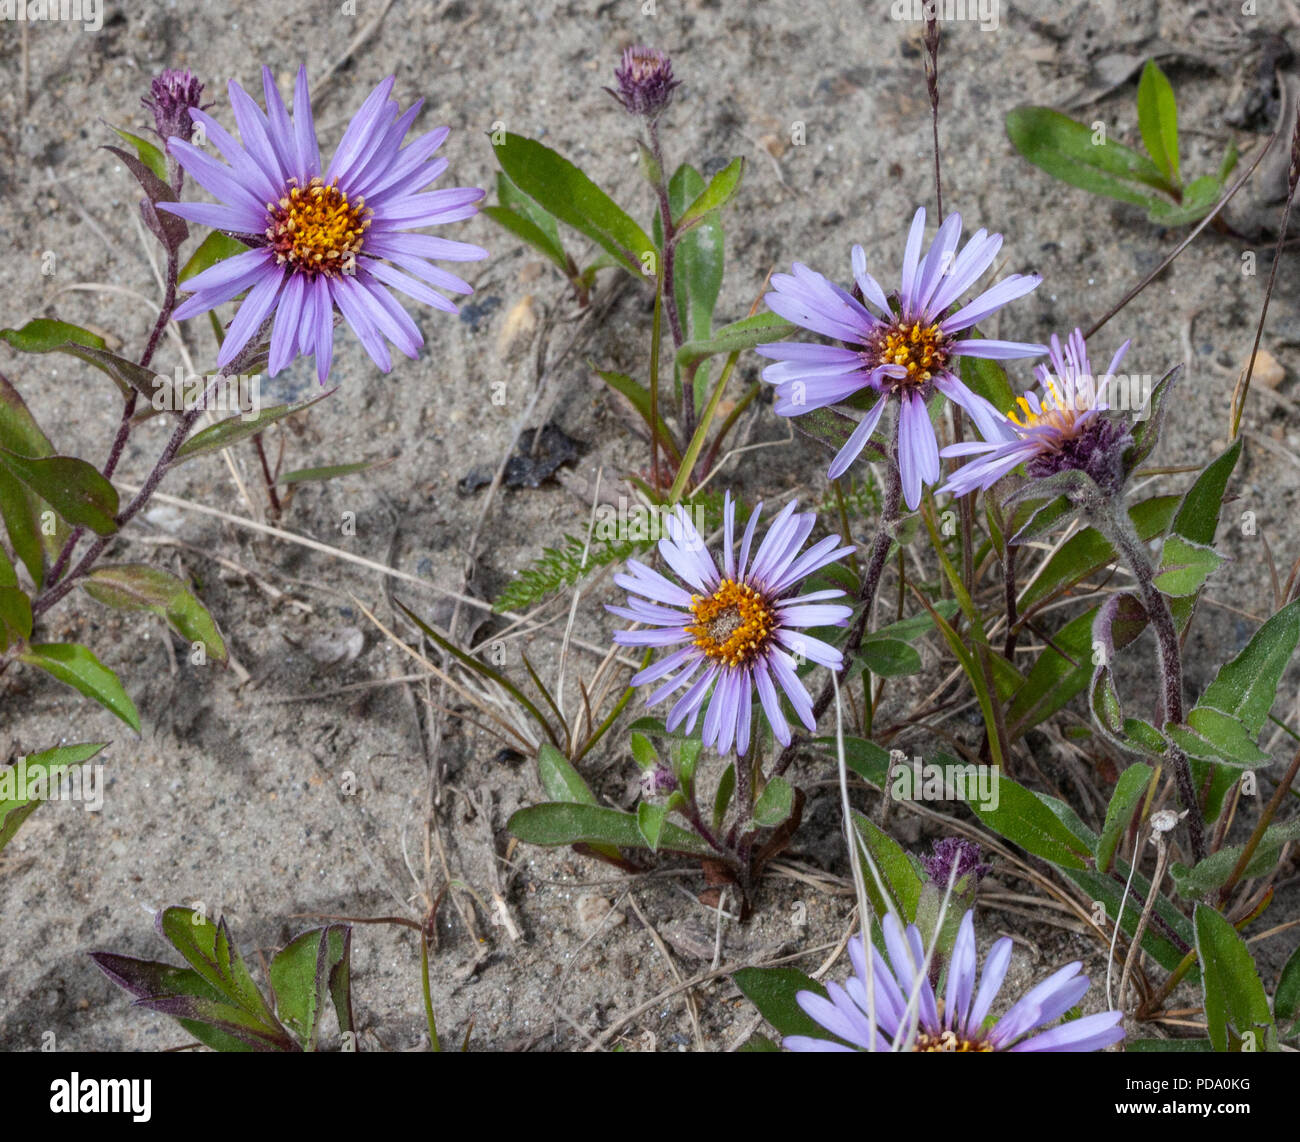 A group of violet Arctic Asters (Eurybia sibirica) blooming in Nome, Alaska Stock Photo